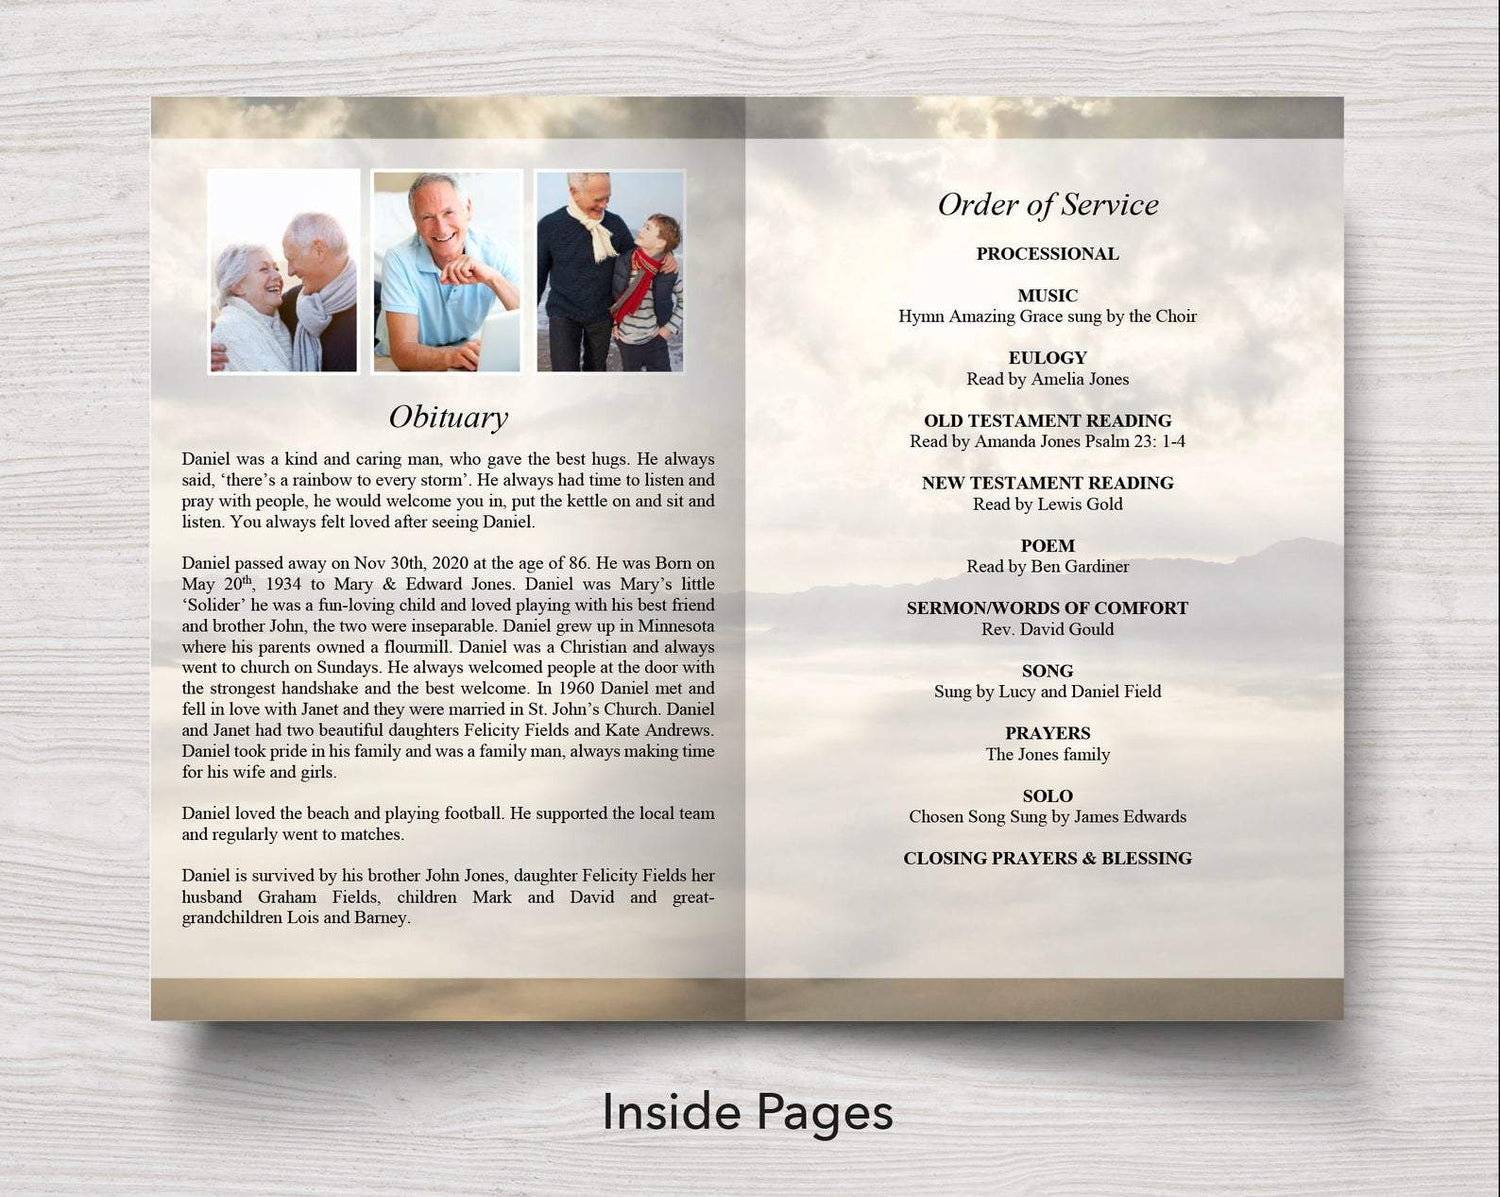 4 Page Mountain Top Funeral Program Template